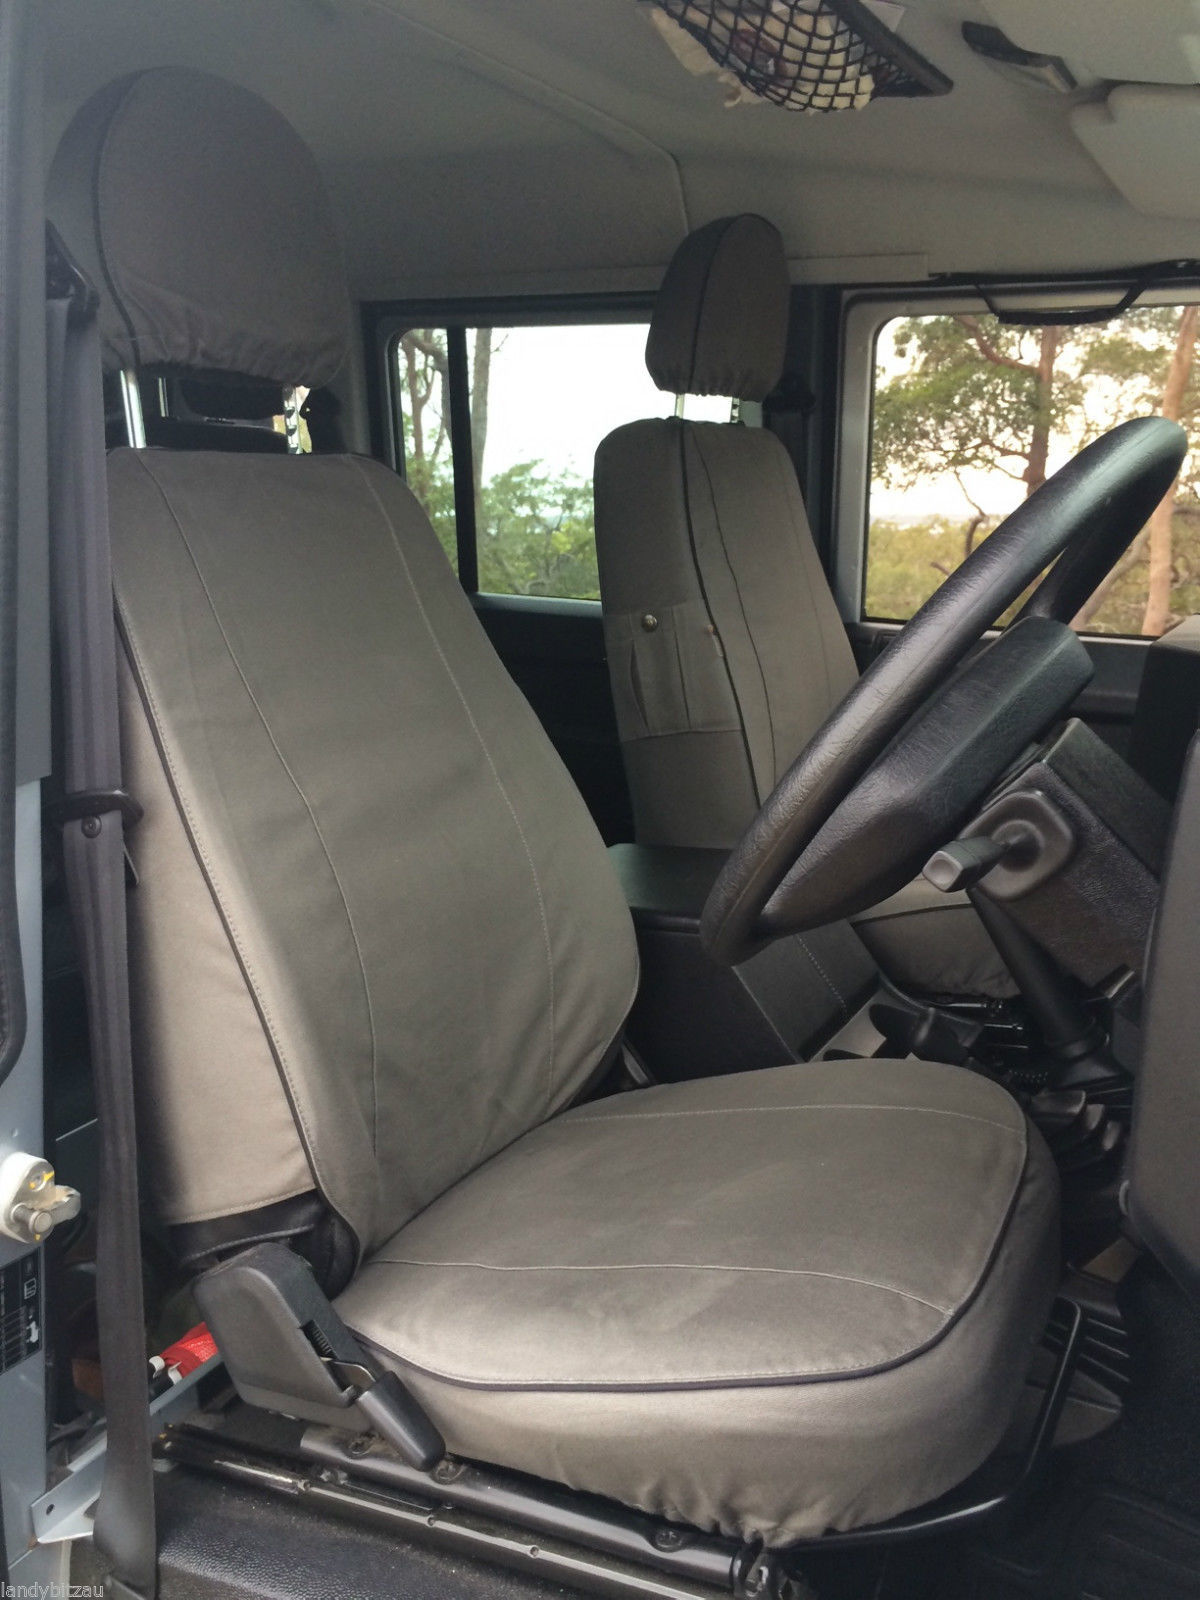 Escape Land Rover Defender Front & Rear Canvas Seat Covers